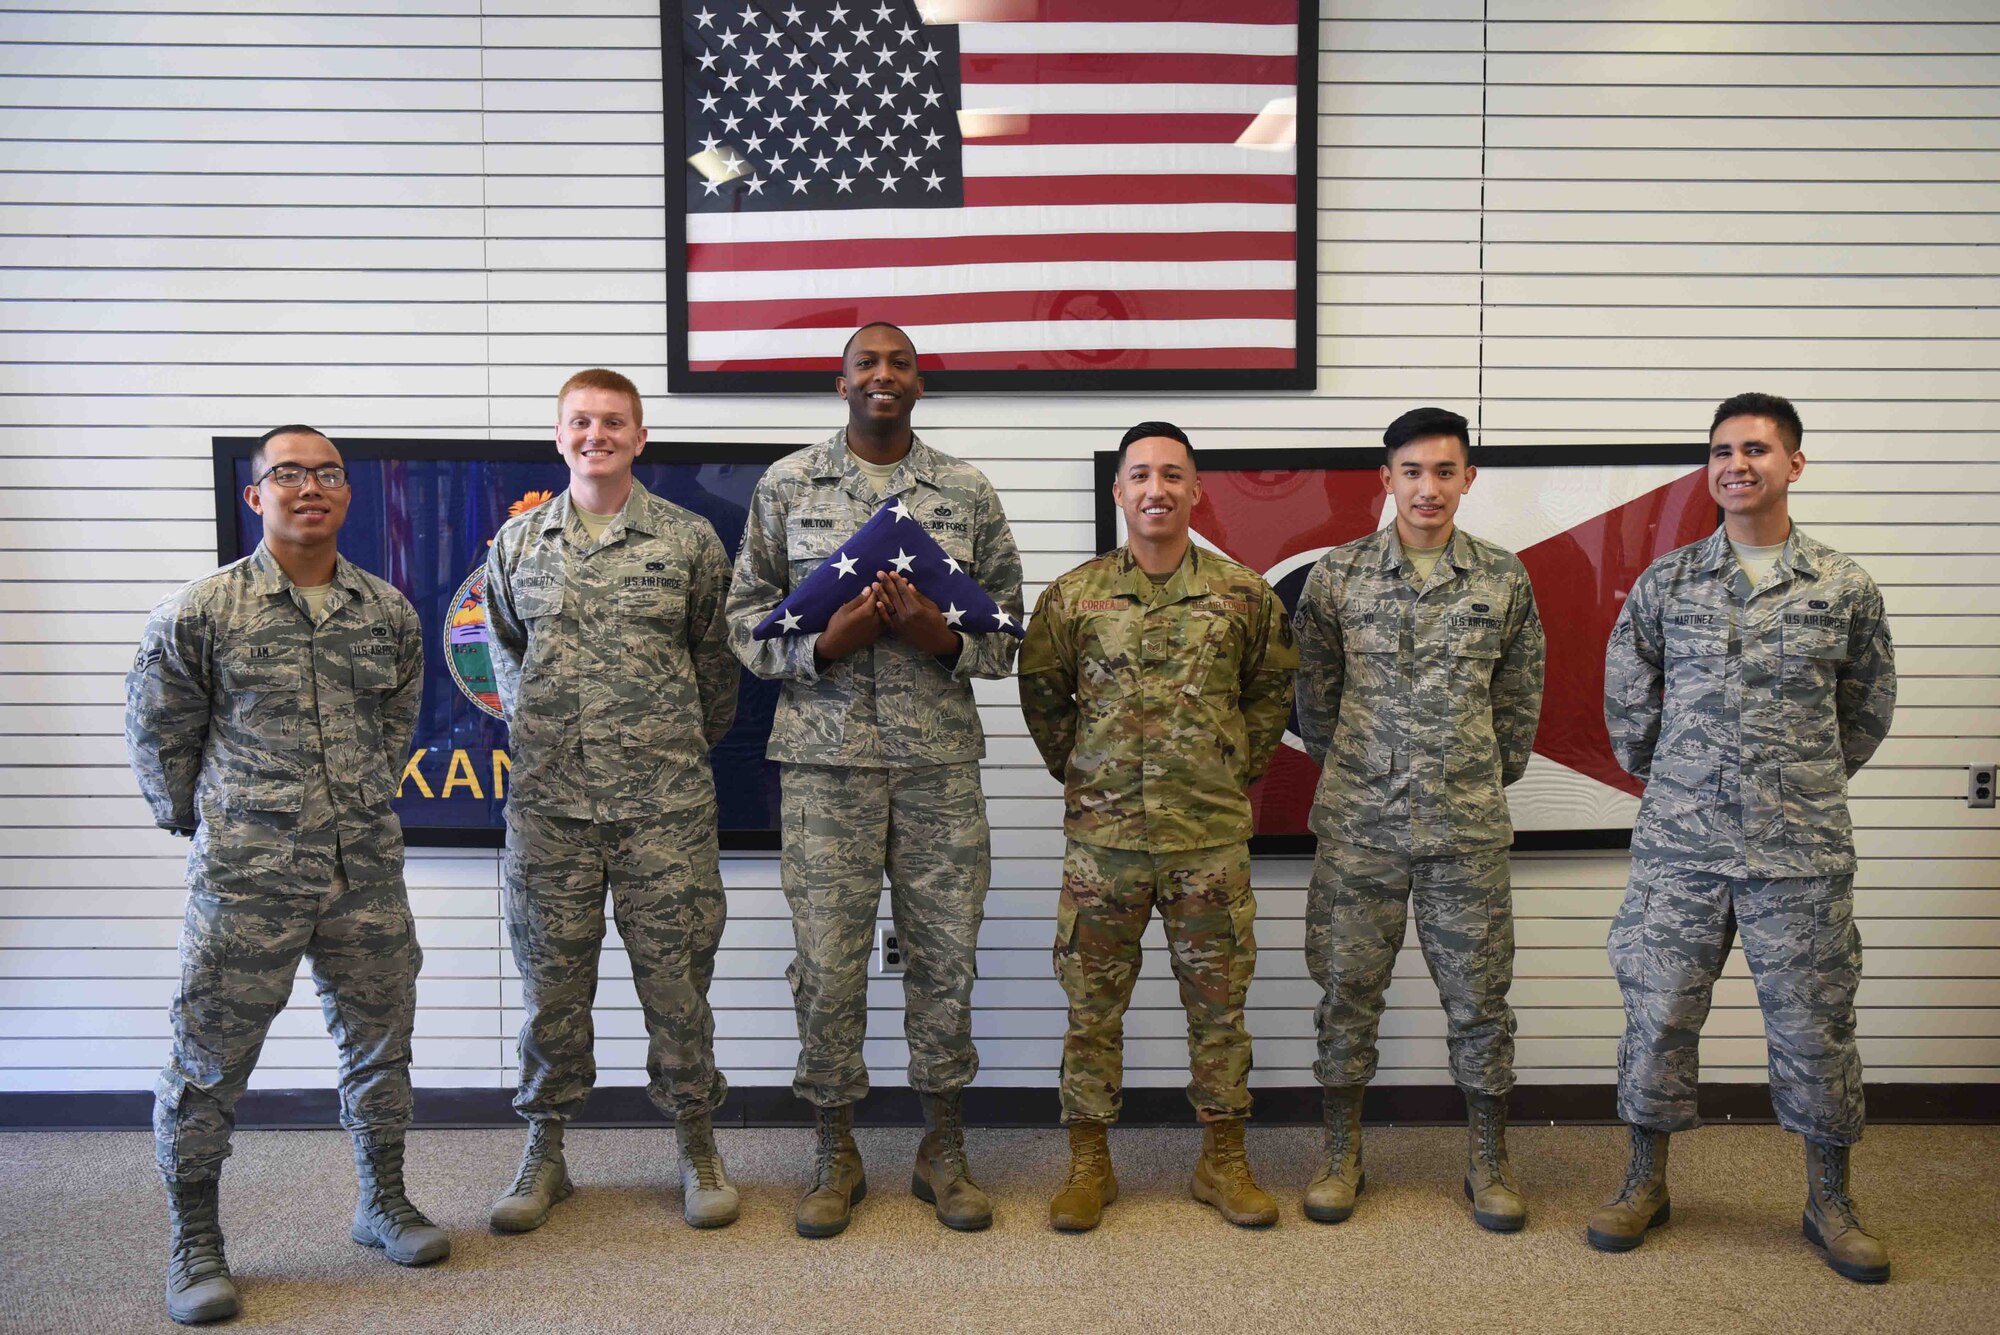 Members of the McConnell Air Force Base Honor Guard pose for a photo July 9, 2019, at McConnell Air Force Base, Kan. McConnell’s Honor Guard practices presenting the colors, folding the flag and executing flag duty so they are prepared to perform at all types of events on and off base. (U.S. Air Force photo by Airman 1st Class Alexi Myrick)